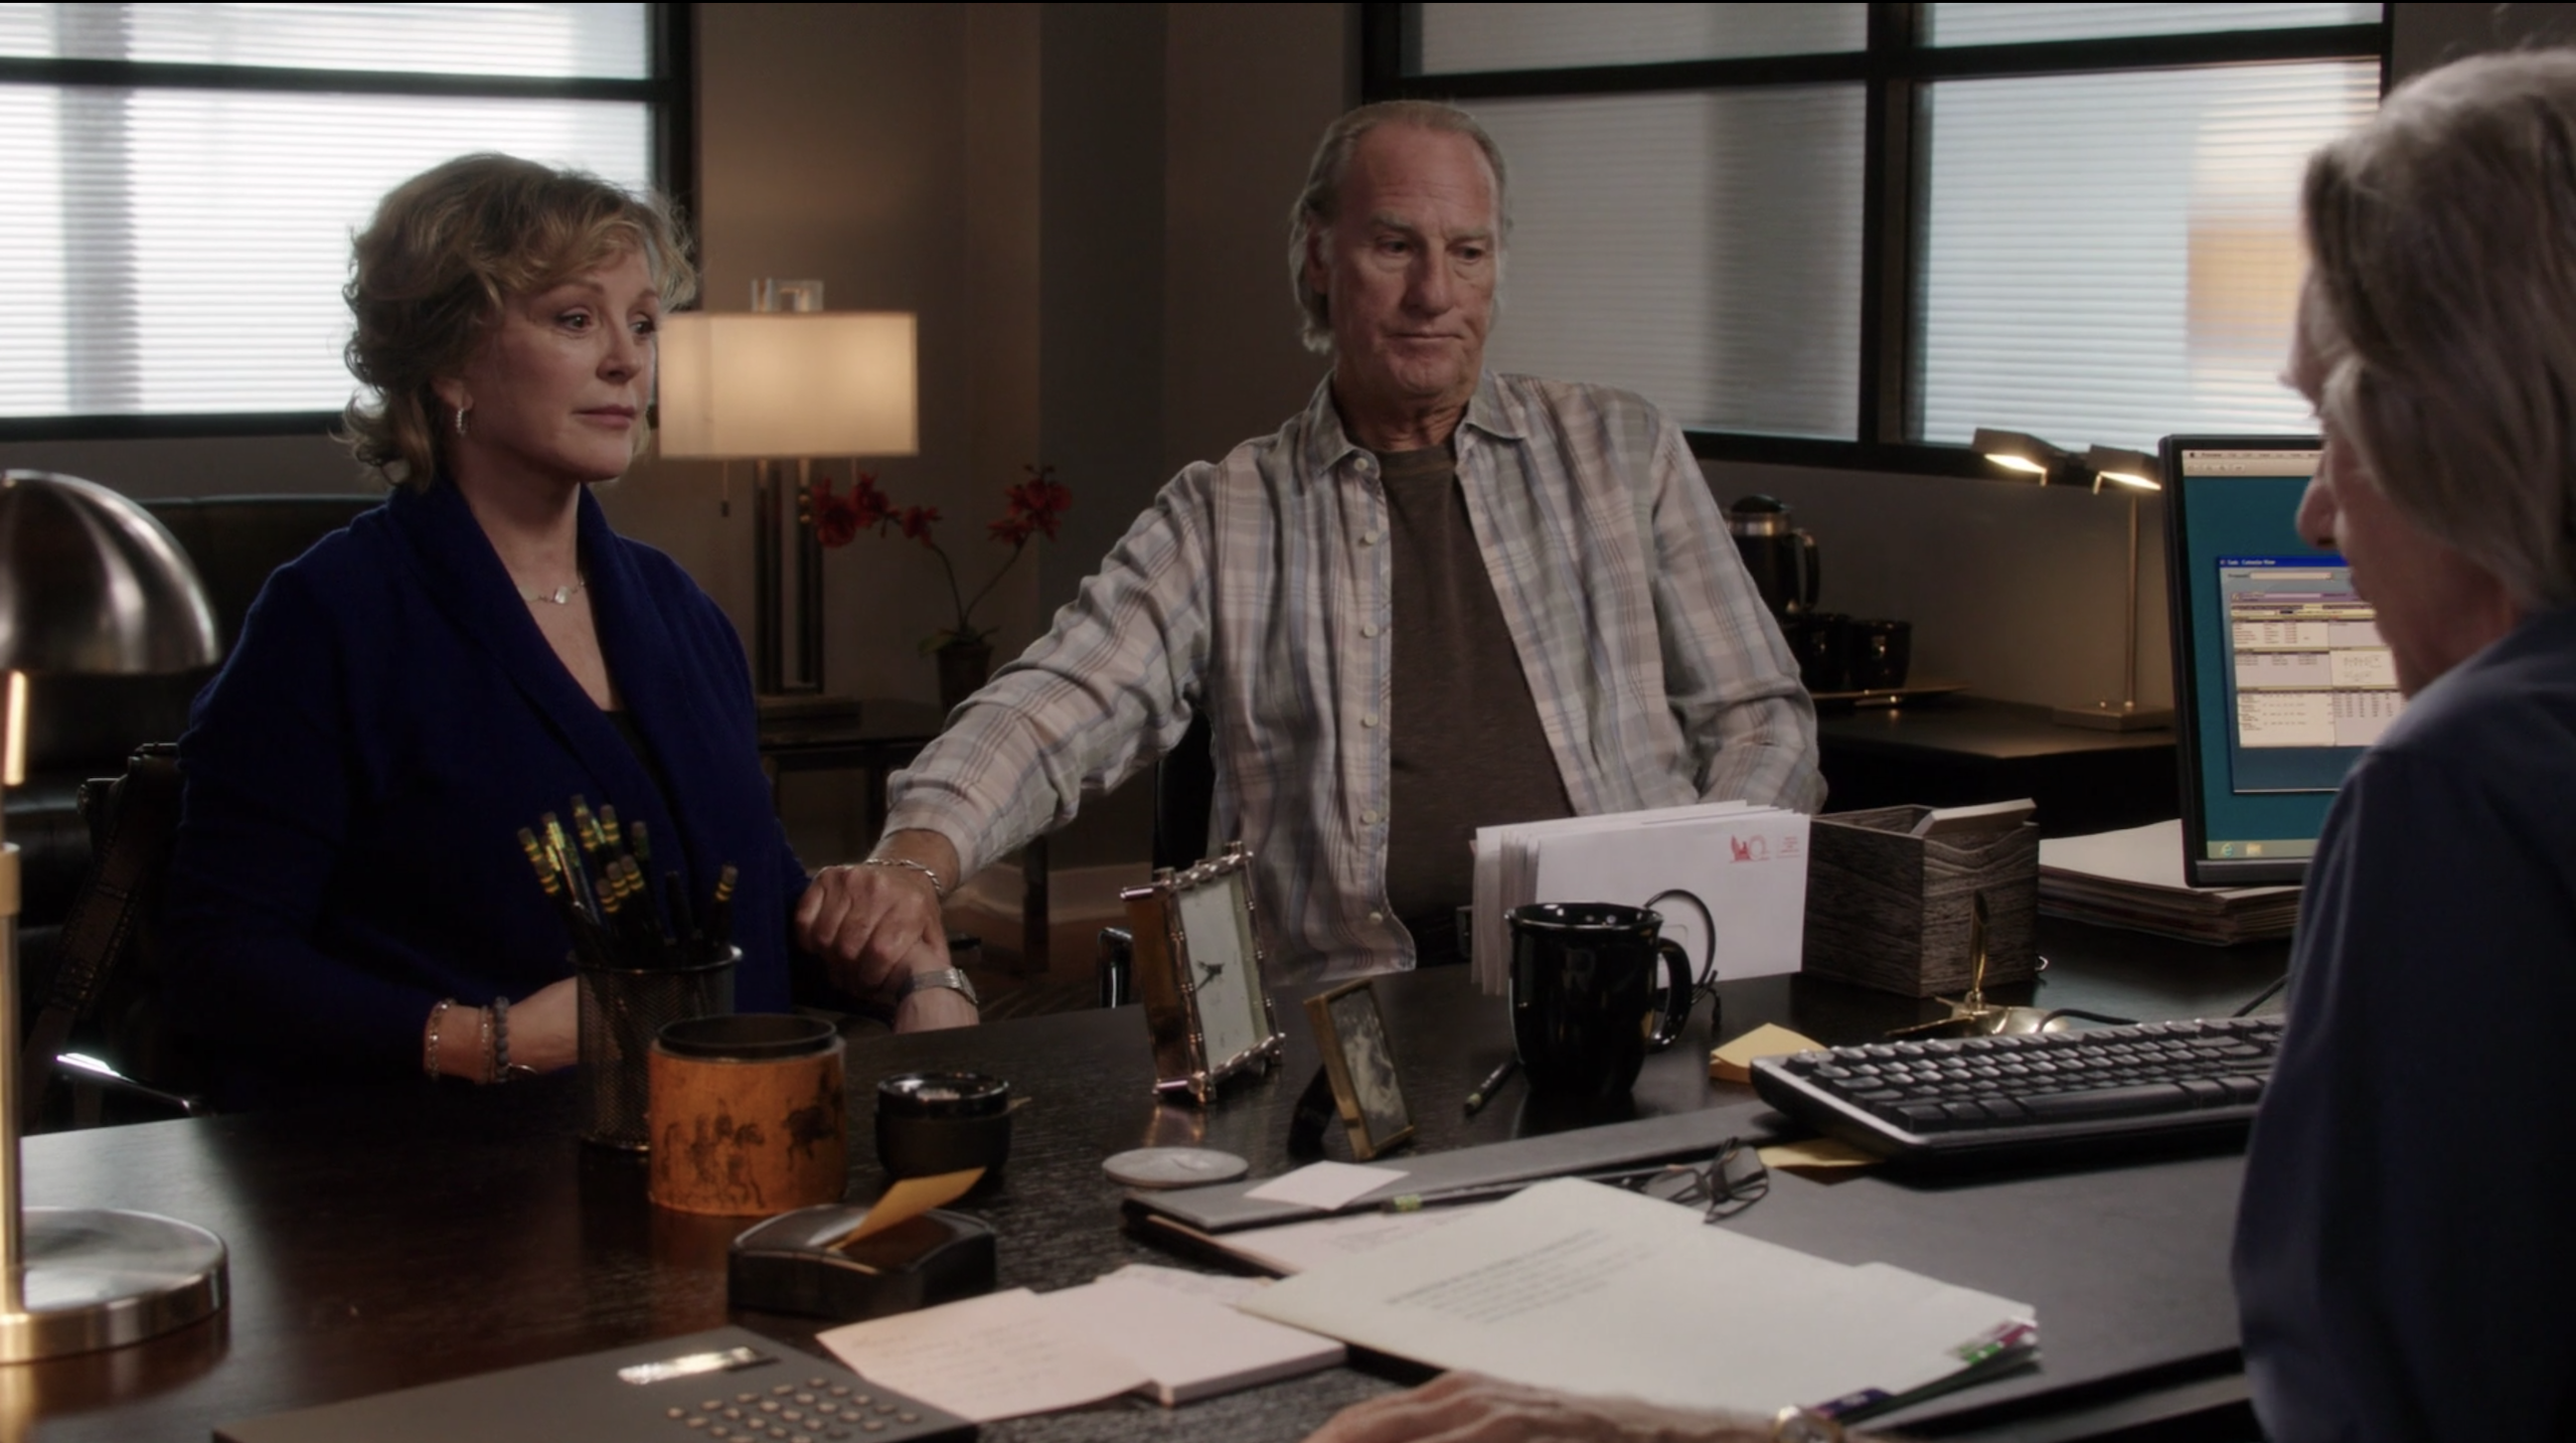 Craig T. Nelson and Bonnie Bedelia sit in an office together